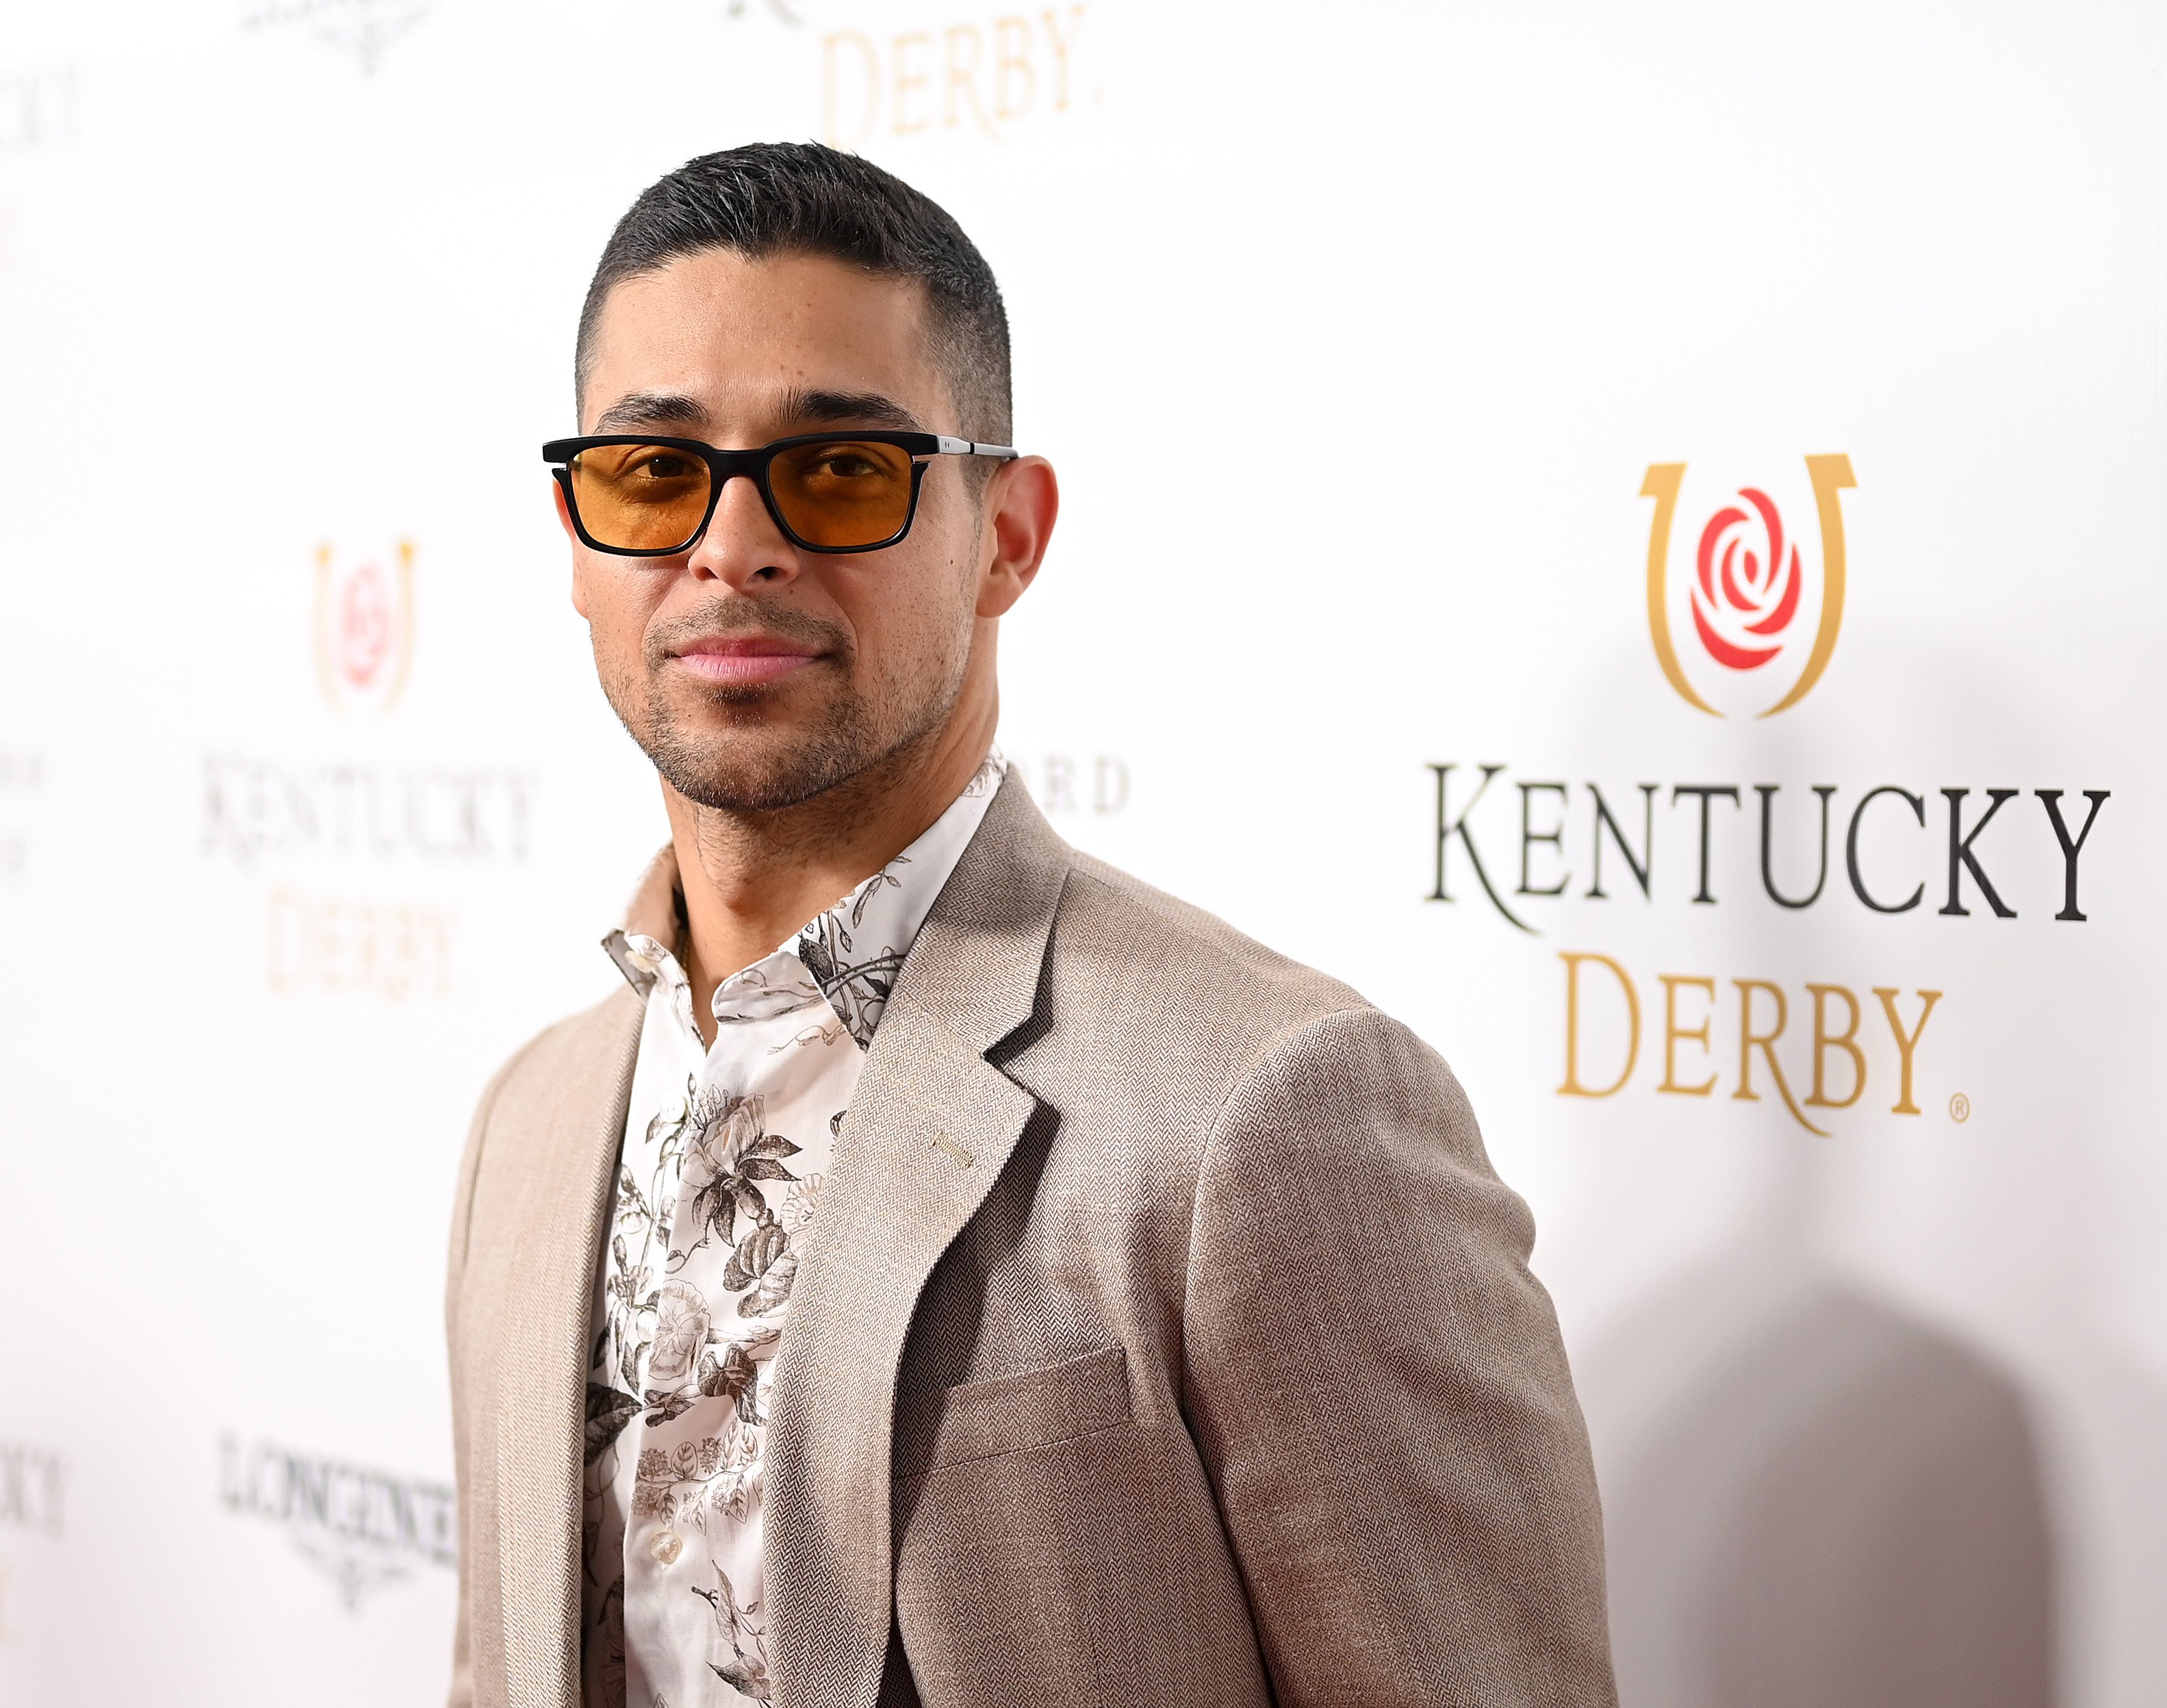 Wilmer Valderrama attends the 145th Kentucky Derby at Churchill Downs | Source: Getty Images